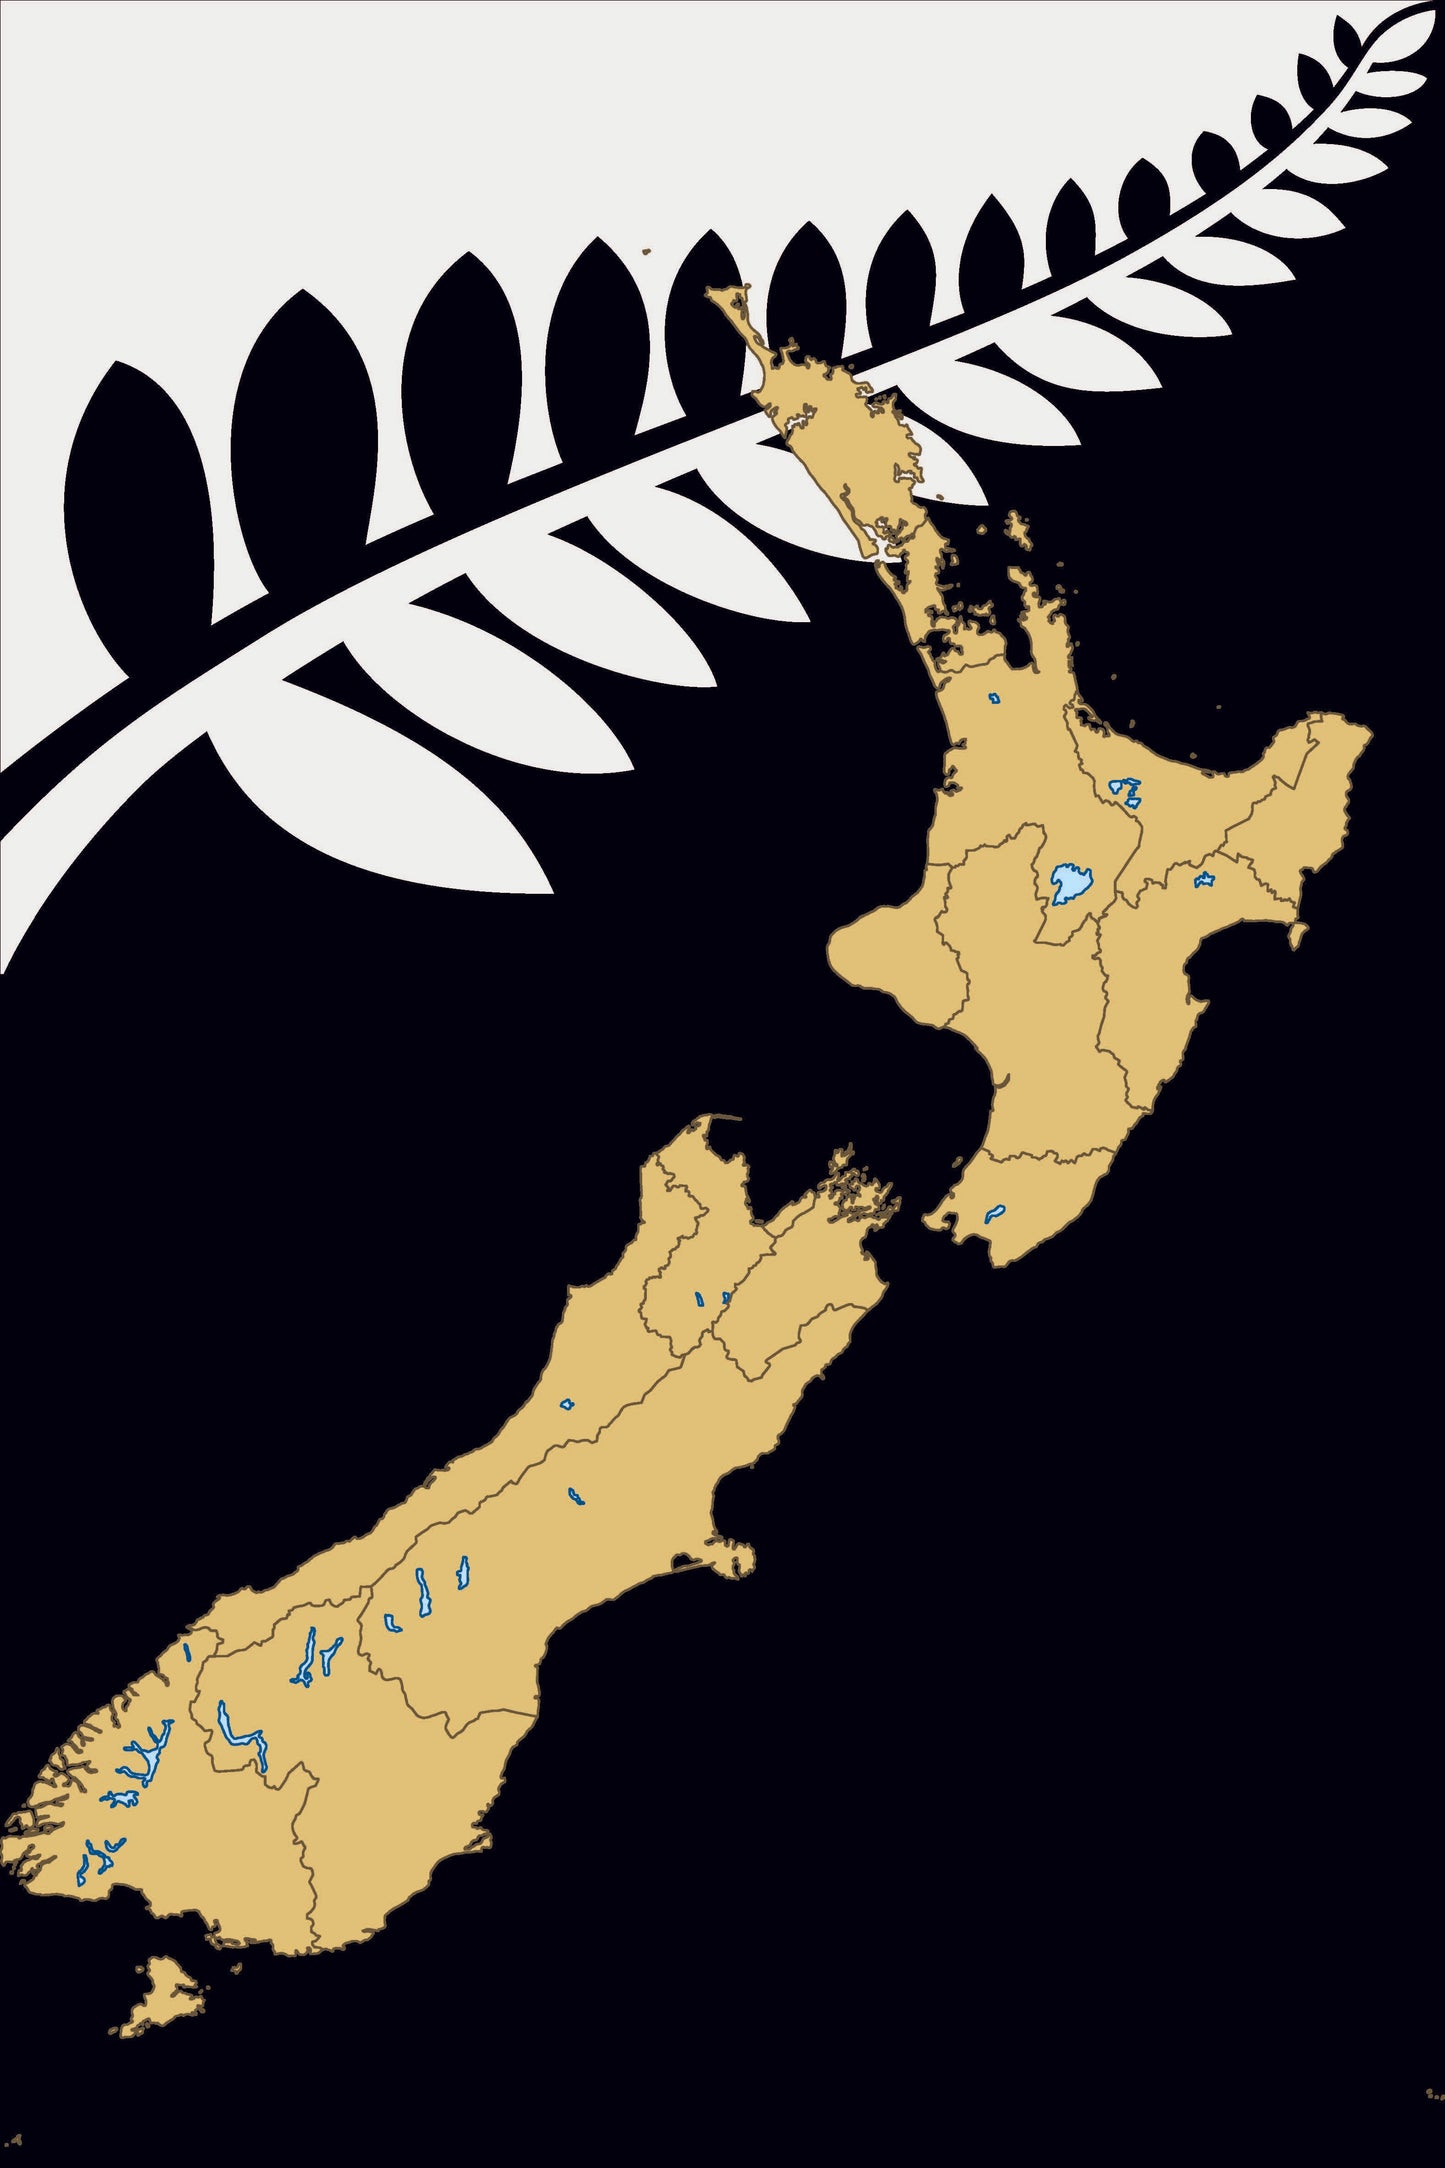 New Zealand Map and Fern